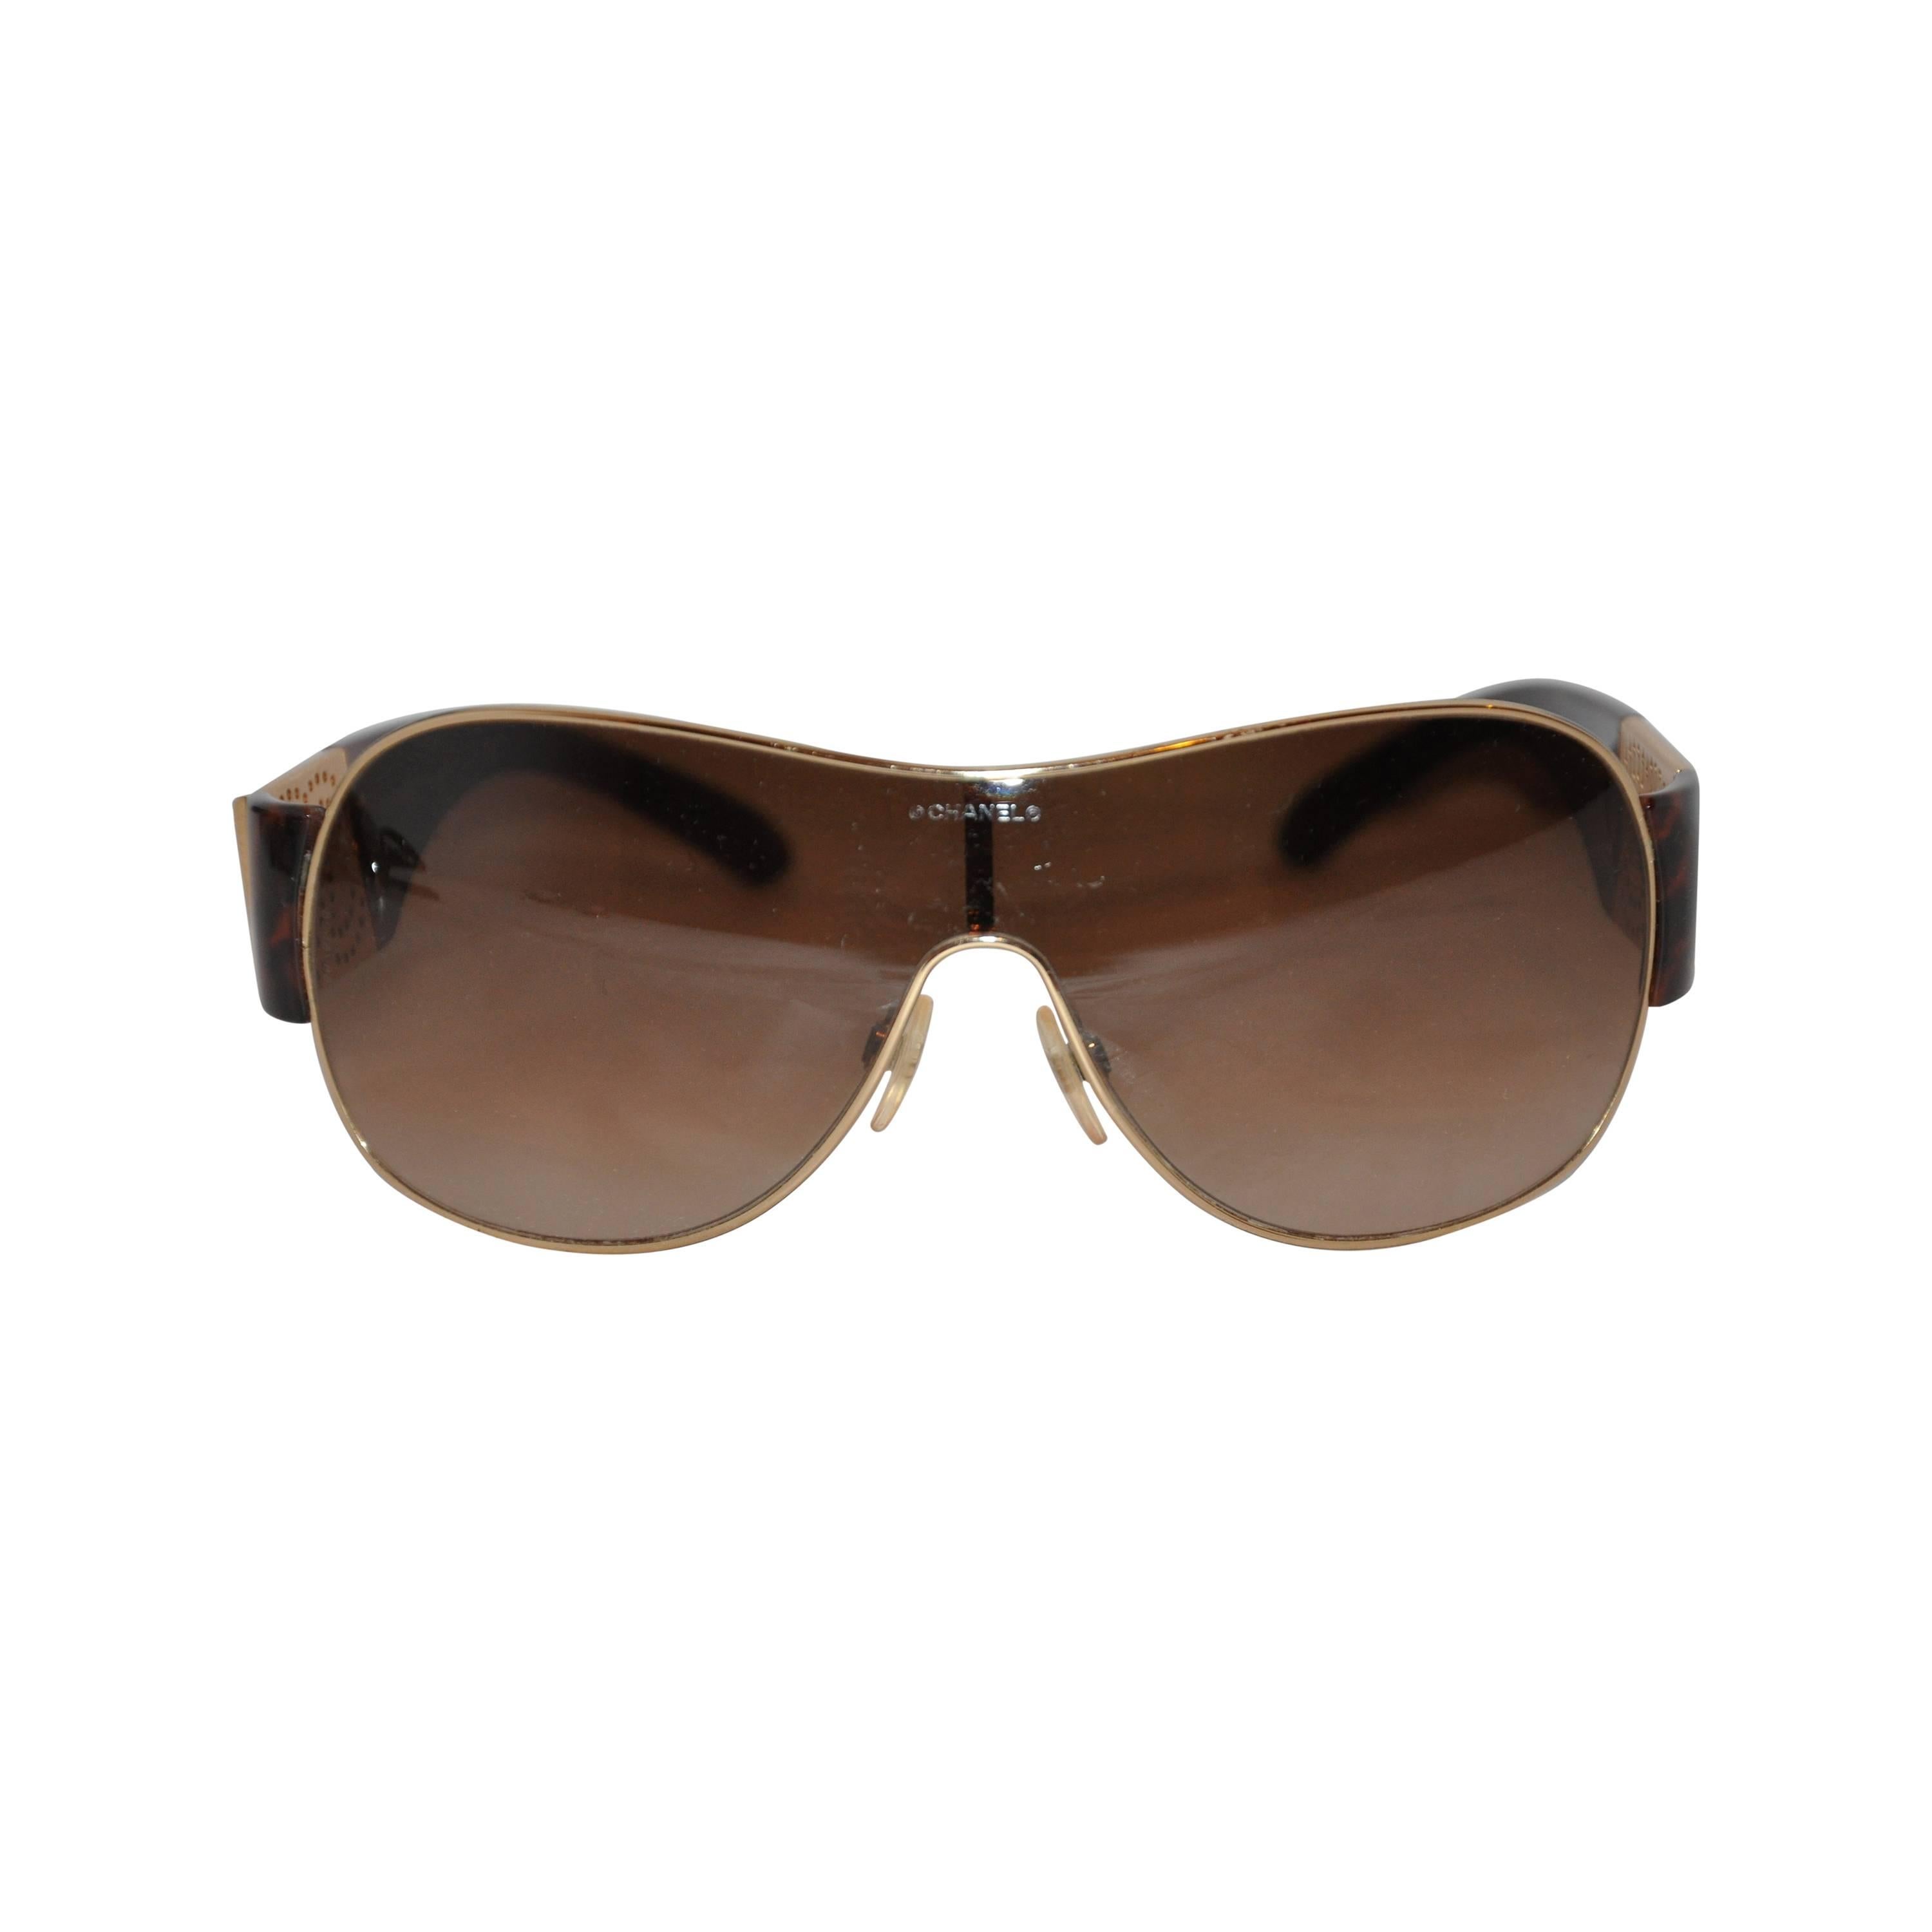 Chanel Bold Tortoise Shell with Gold Hardware Sunglasses